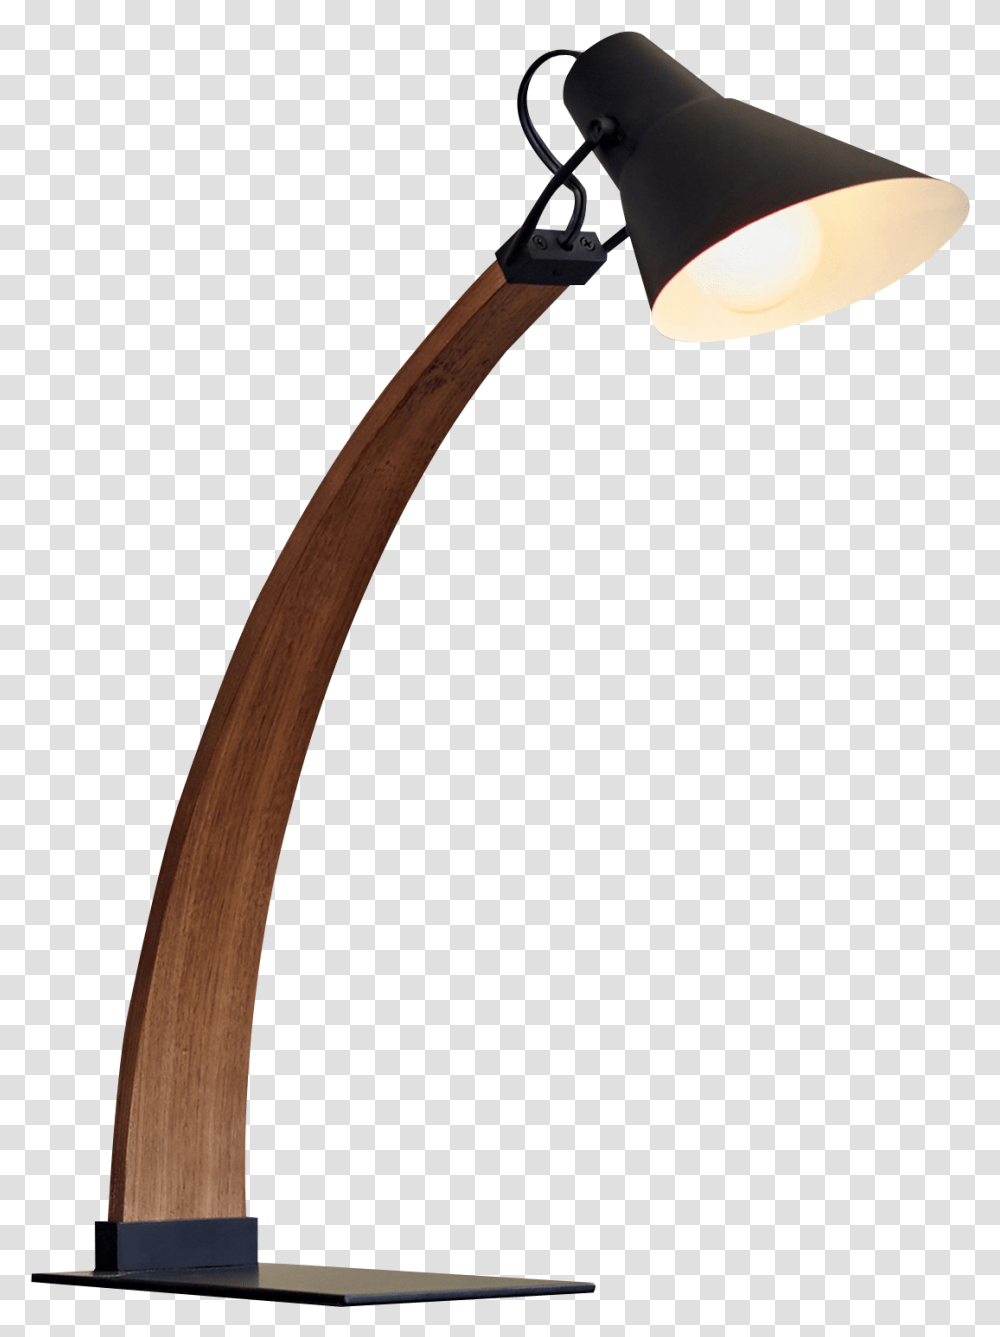 Download Table Lamp Image For Free Table Lamp, Axe, Tool, Lampshade Transparent Png